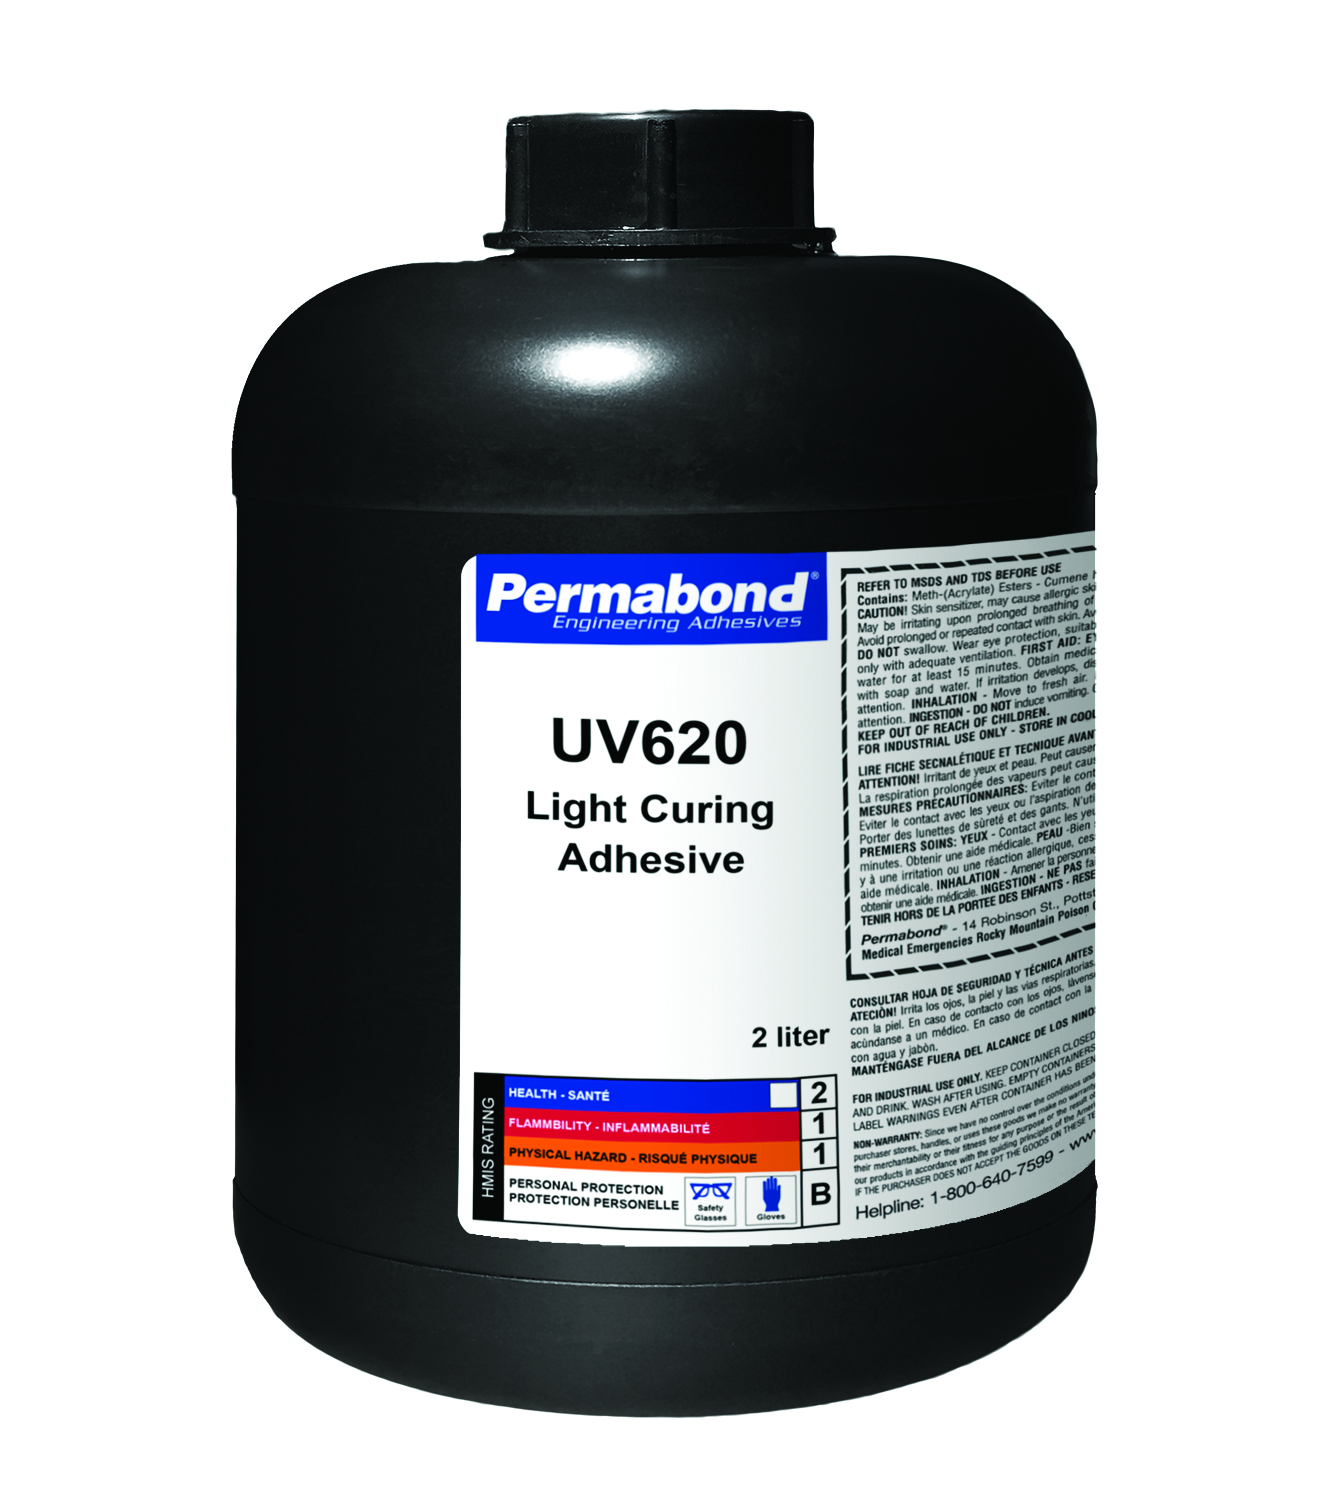 un-du (TM) Adhesive Remover - APPROVED for use in California